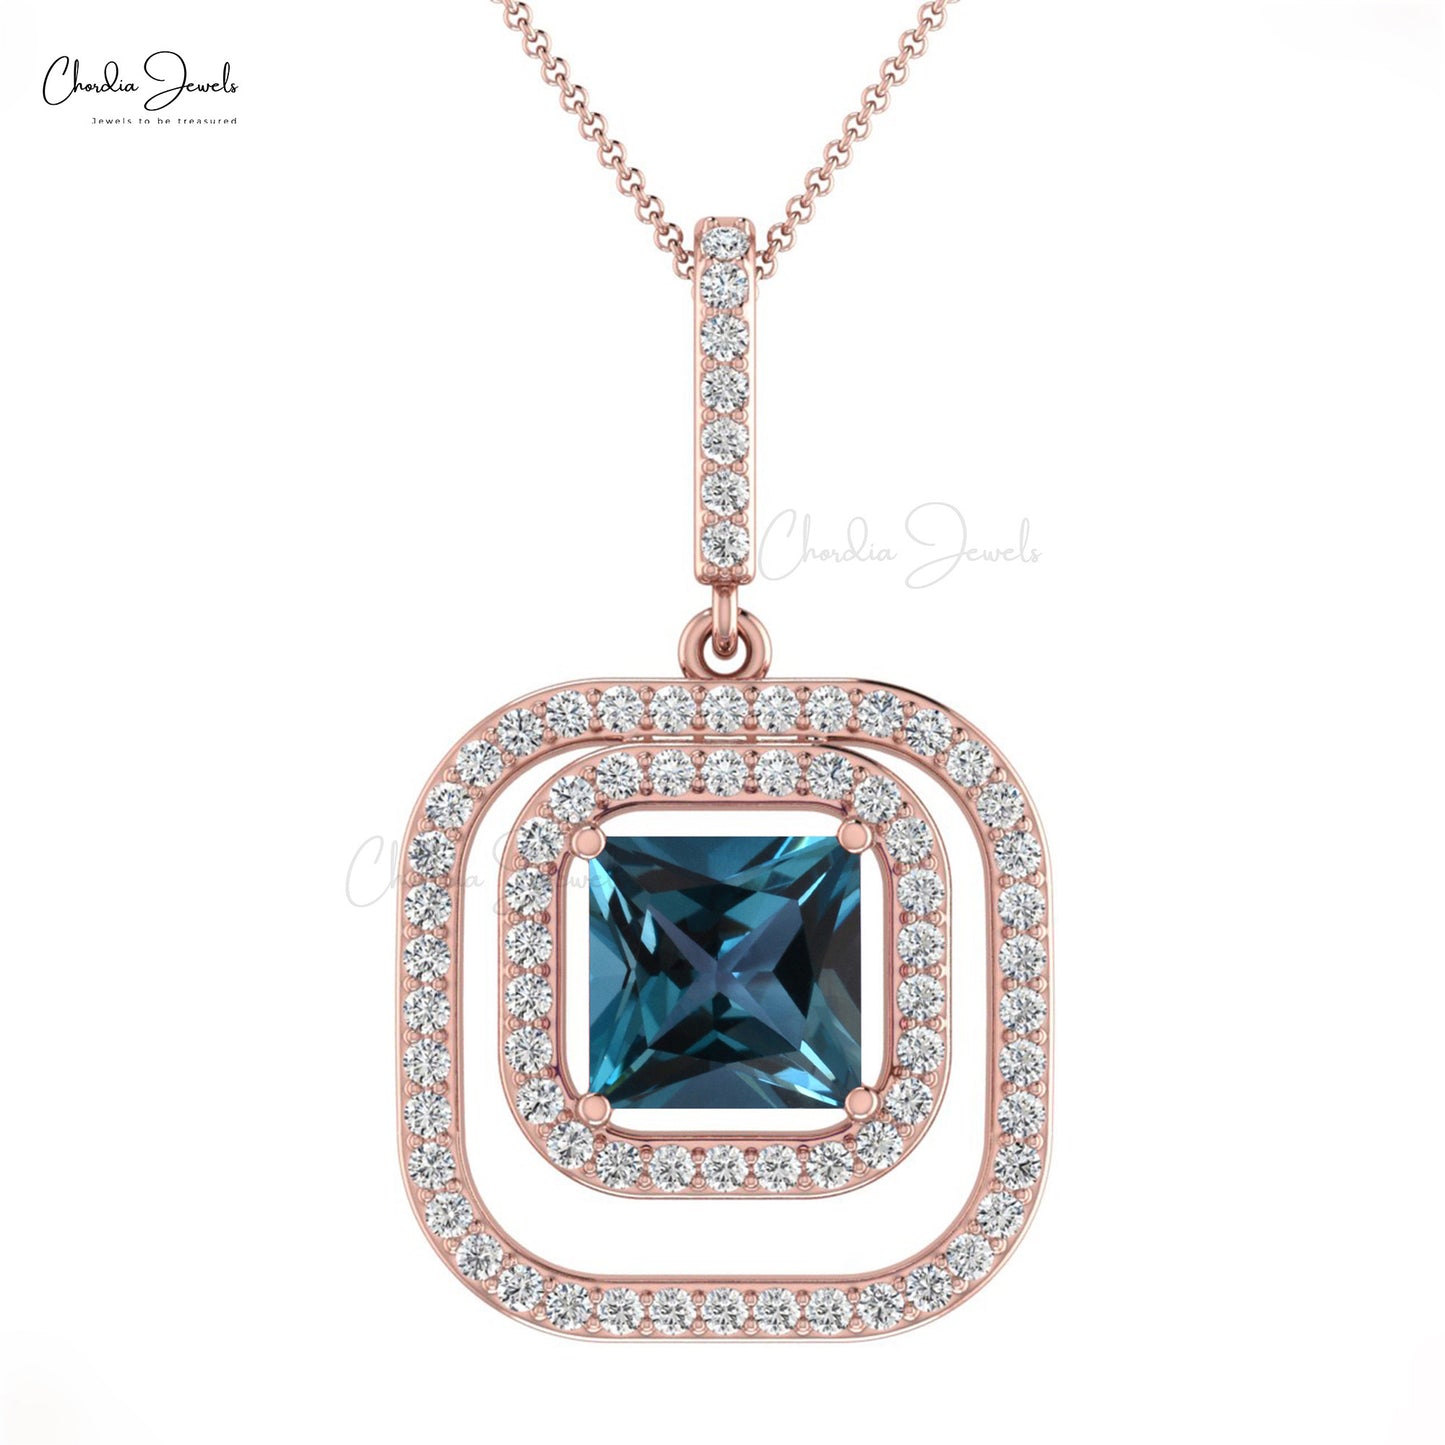 High Quality 100% Genuine Square London Blue Topaz Gemstone Double Halo Pendant in 14K Pure Diamond Accented Pendant For Engagement Gift